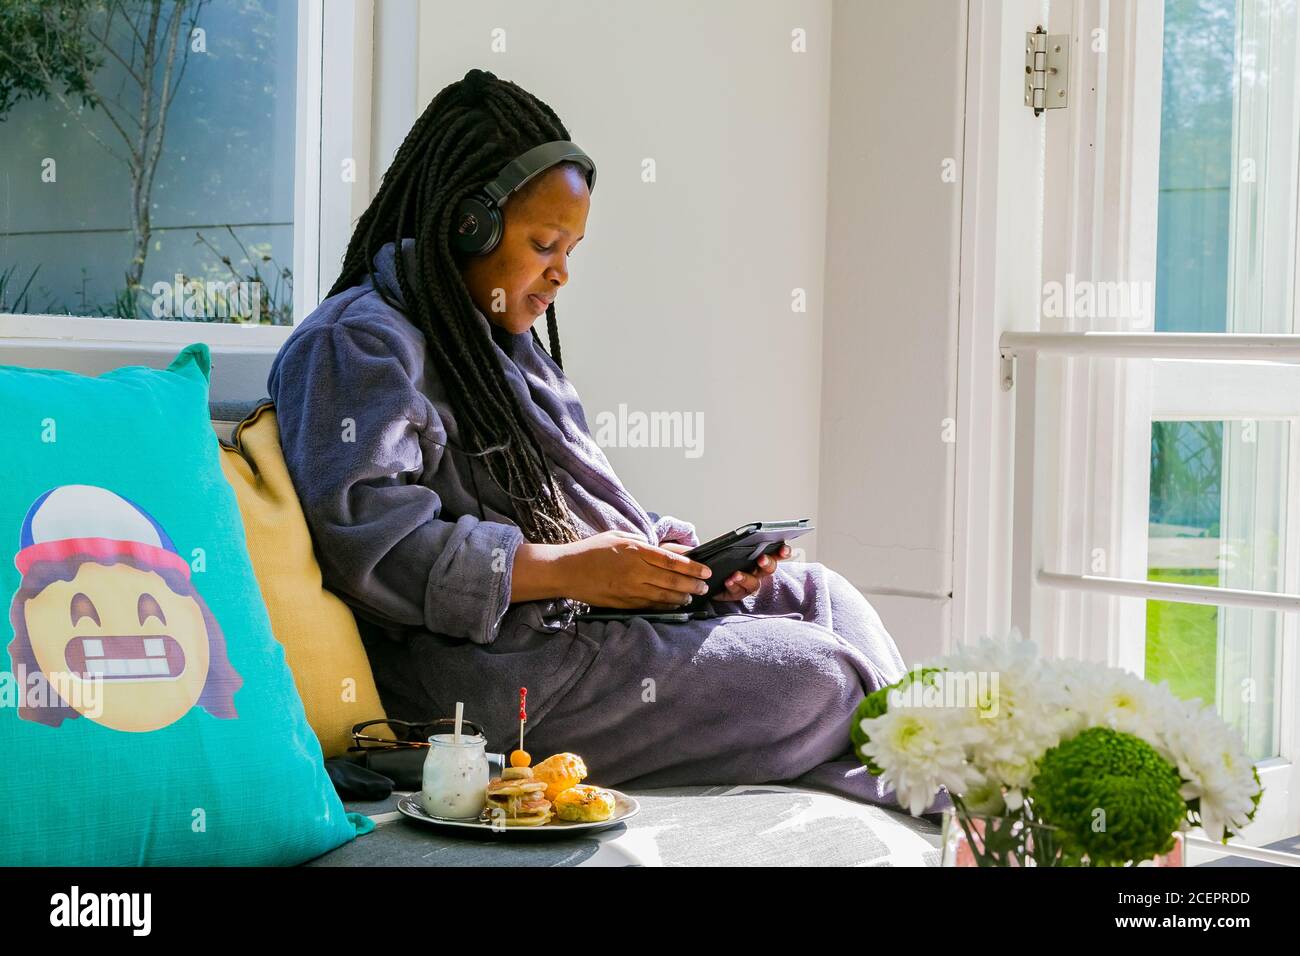 Johannesburg, South Africa - May 10, 2018: Young African woman in bath robe  watching streaming service on tablet computer at spa resort Stock Photo -  Alamy